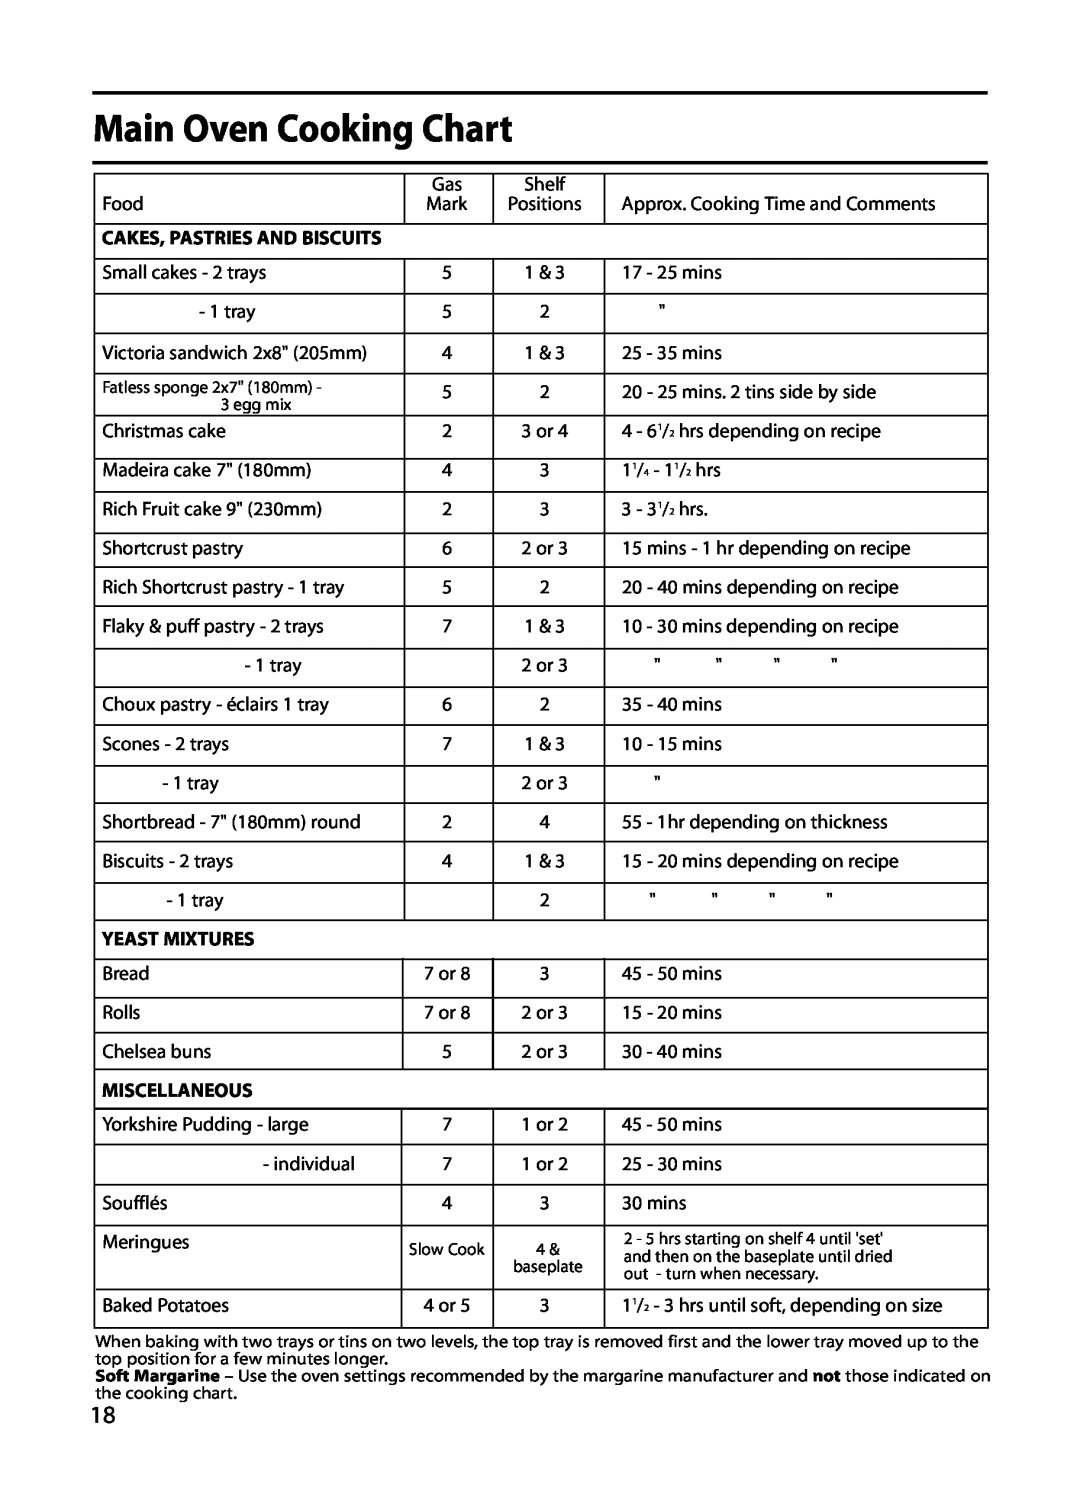 Indesit KD641G, KD643G, KD640G manual Main Oven Cooking Chart, Yeast Mixtures, Miscellaneous 